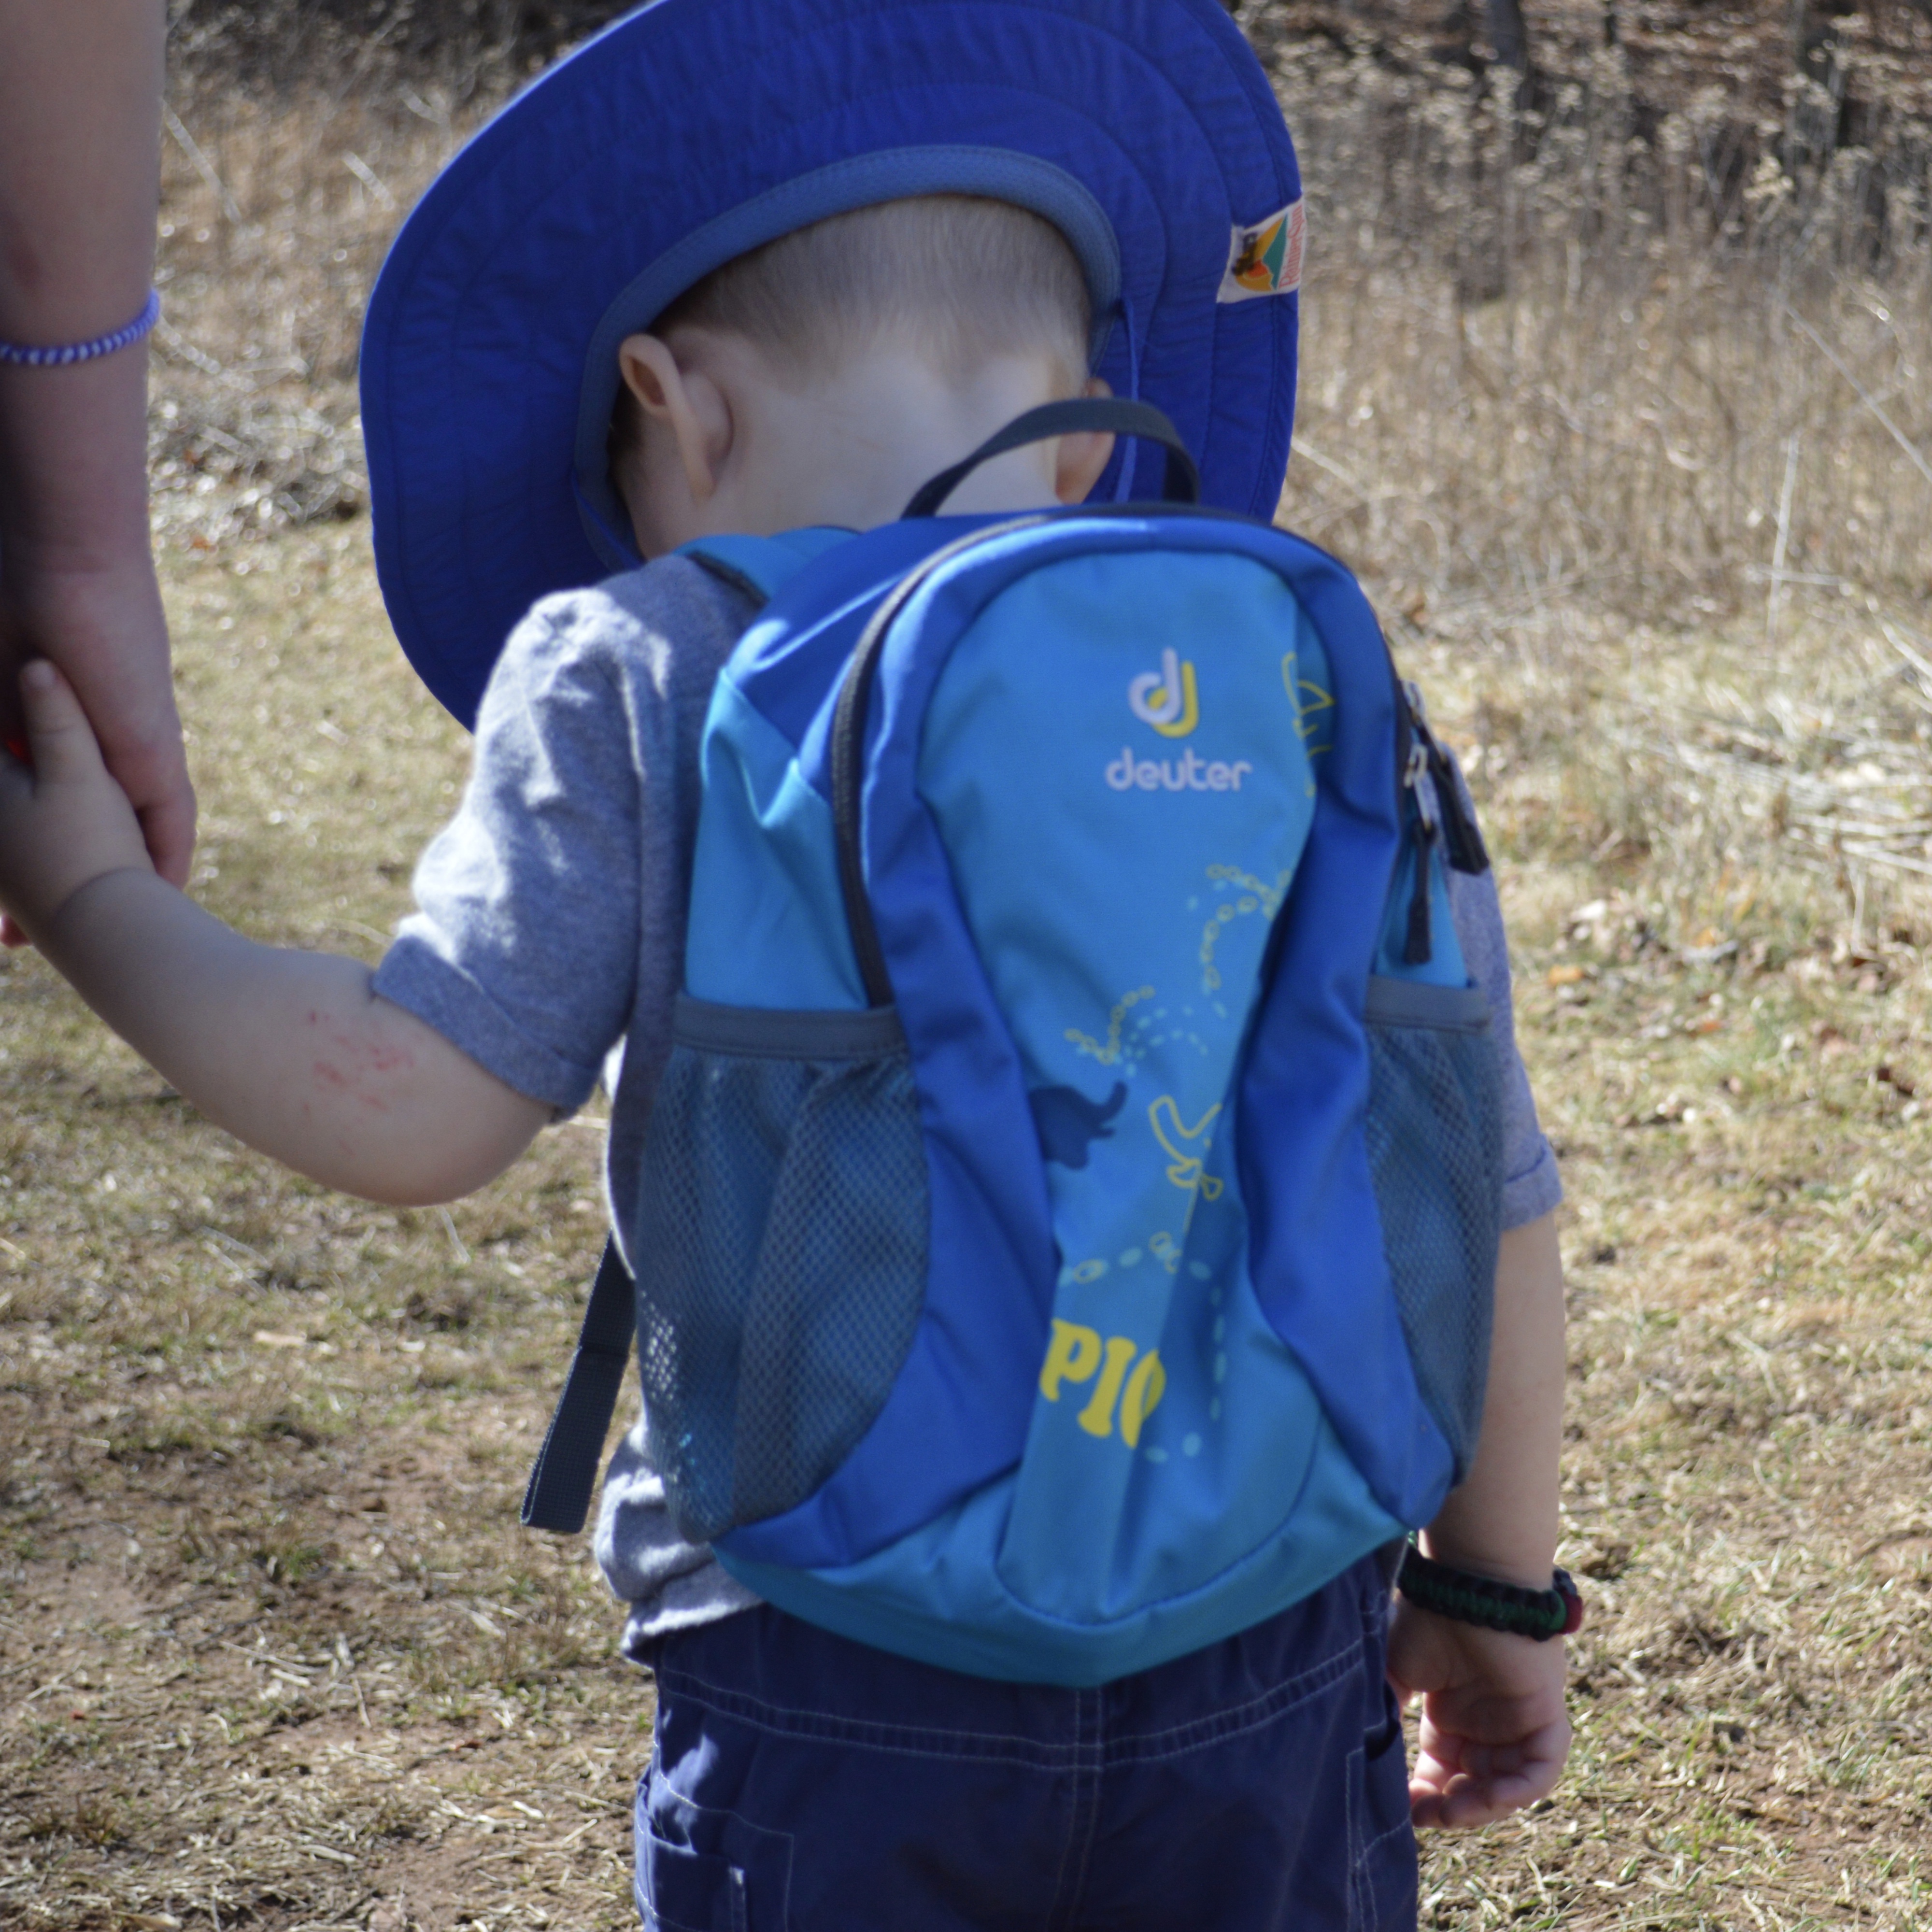 Wondering about hiking packs for kids and adults wearing kids? When we first started hiking, I wasn’t sure if hiking-specific backpacks were worth it. Go to ouradventuringfamily.com to read what we decided to do.